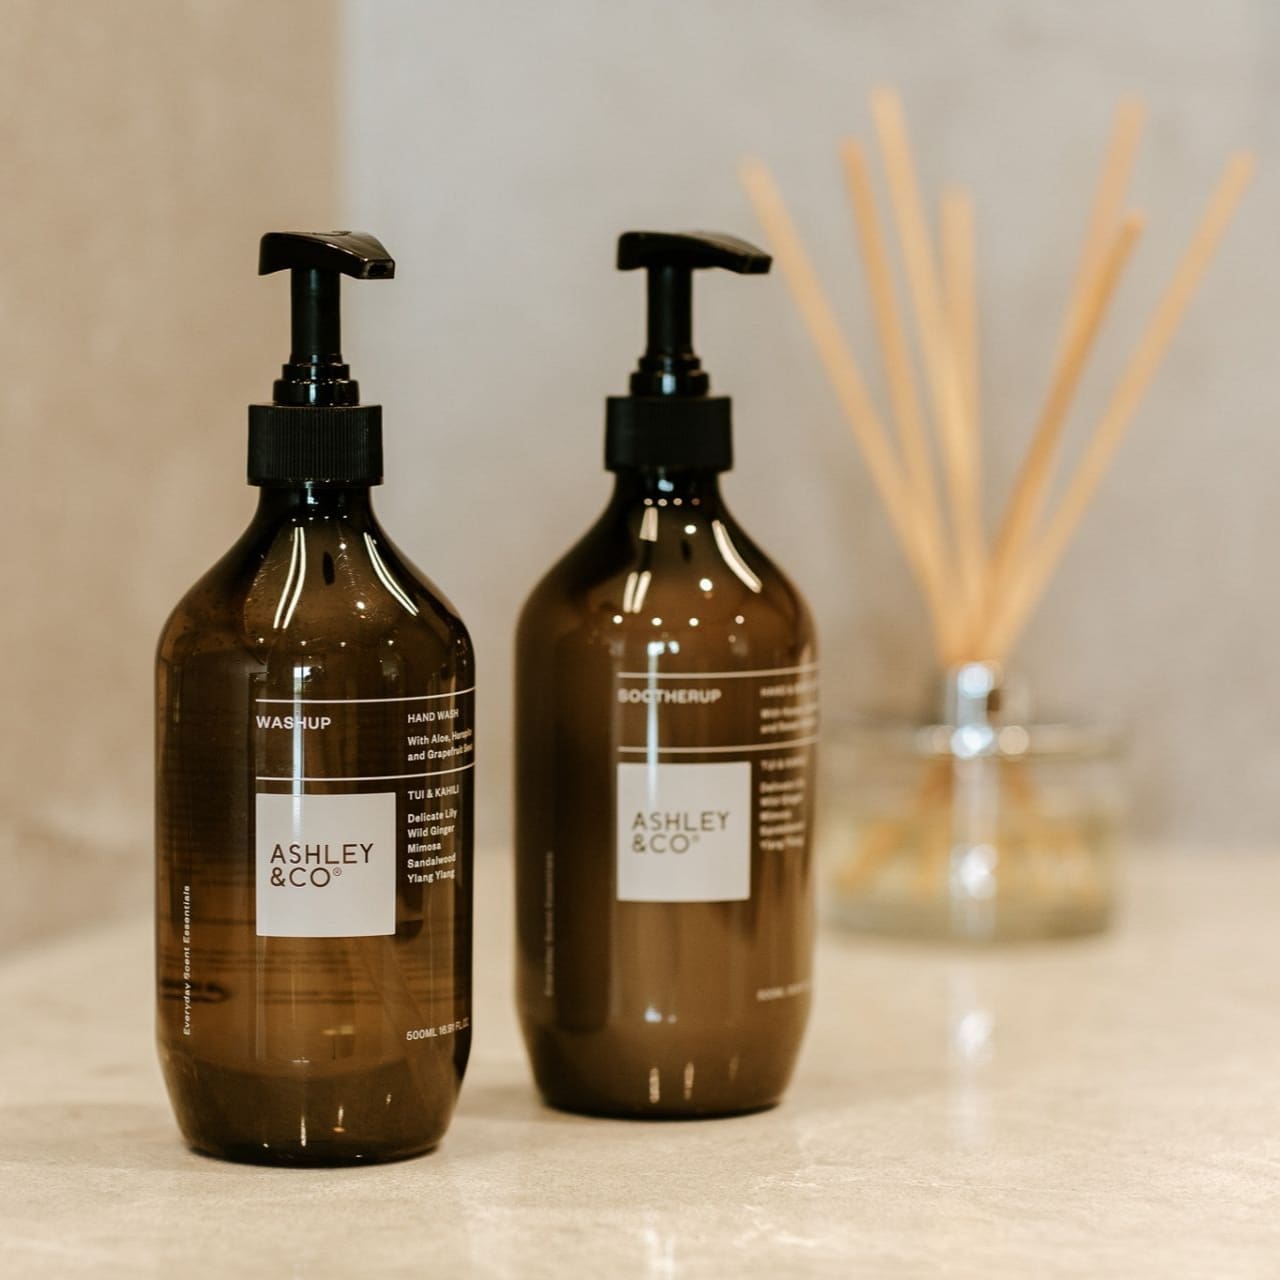 Ashley & Co hand soaps - square